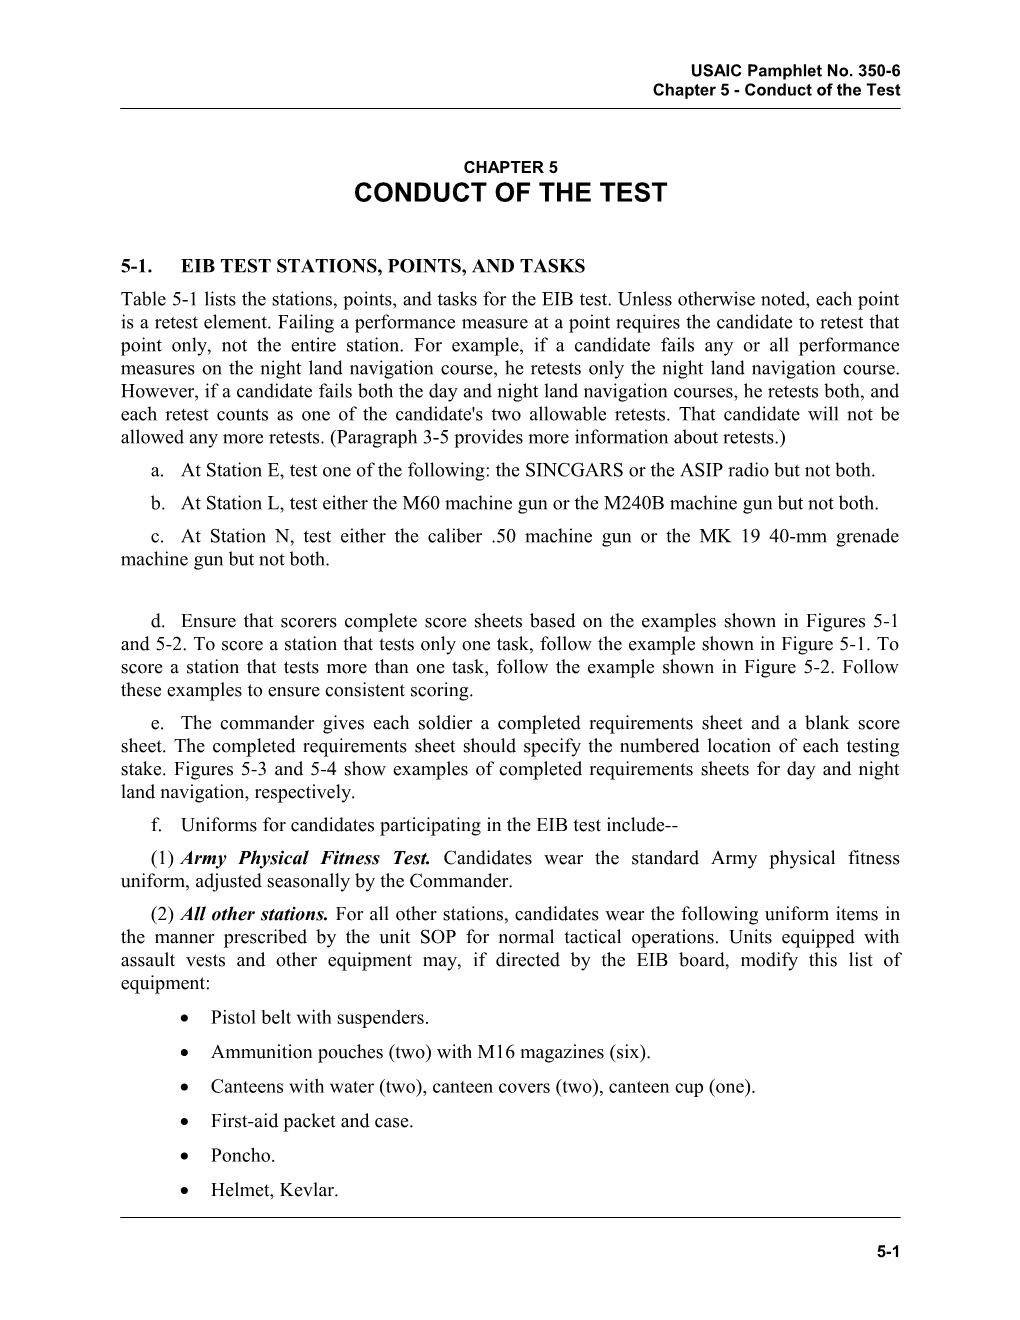 Chapter 5 - Conduct of the Test